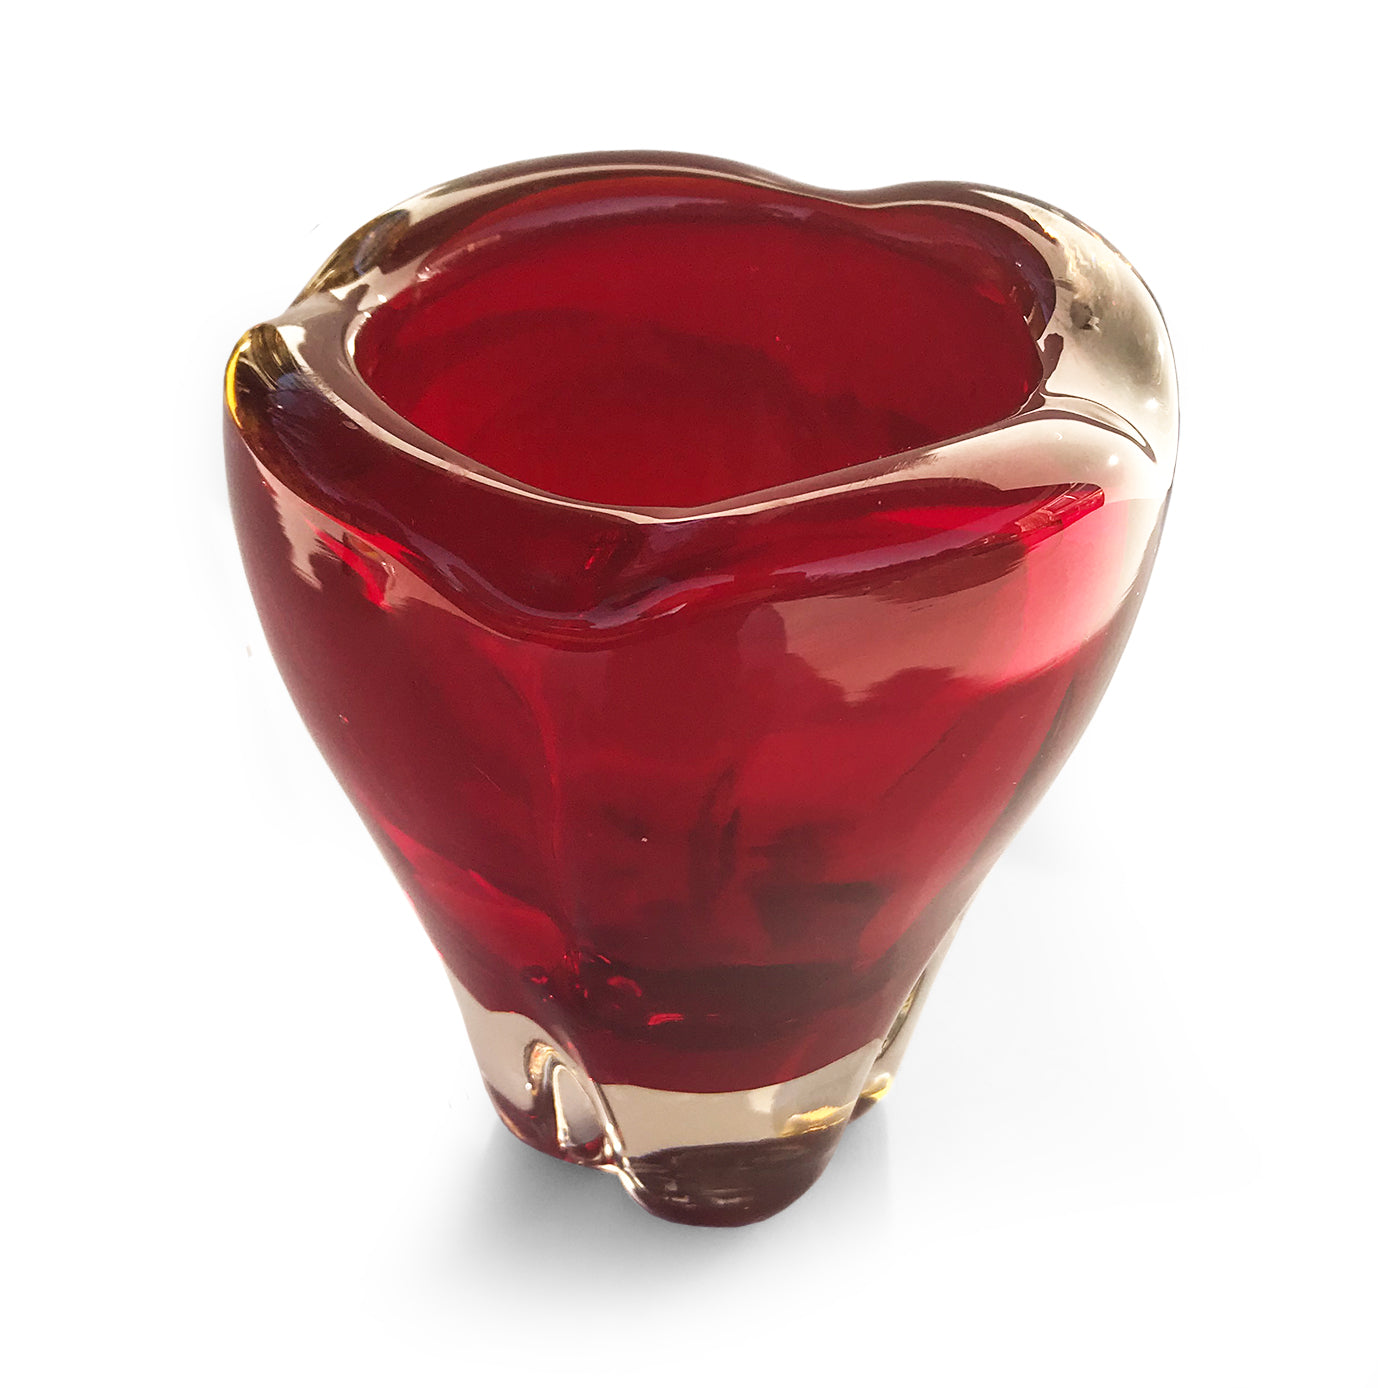 Beautiful Whitefriars Ruby Red glass 'Molar' vase, designed by Geoffrey Baxter, pattern number 9410 - SHOP NOW - www.intovintage.co.uk